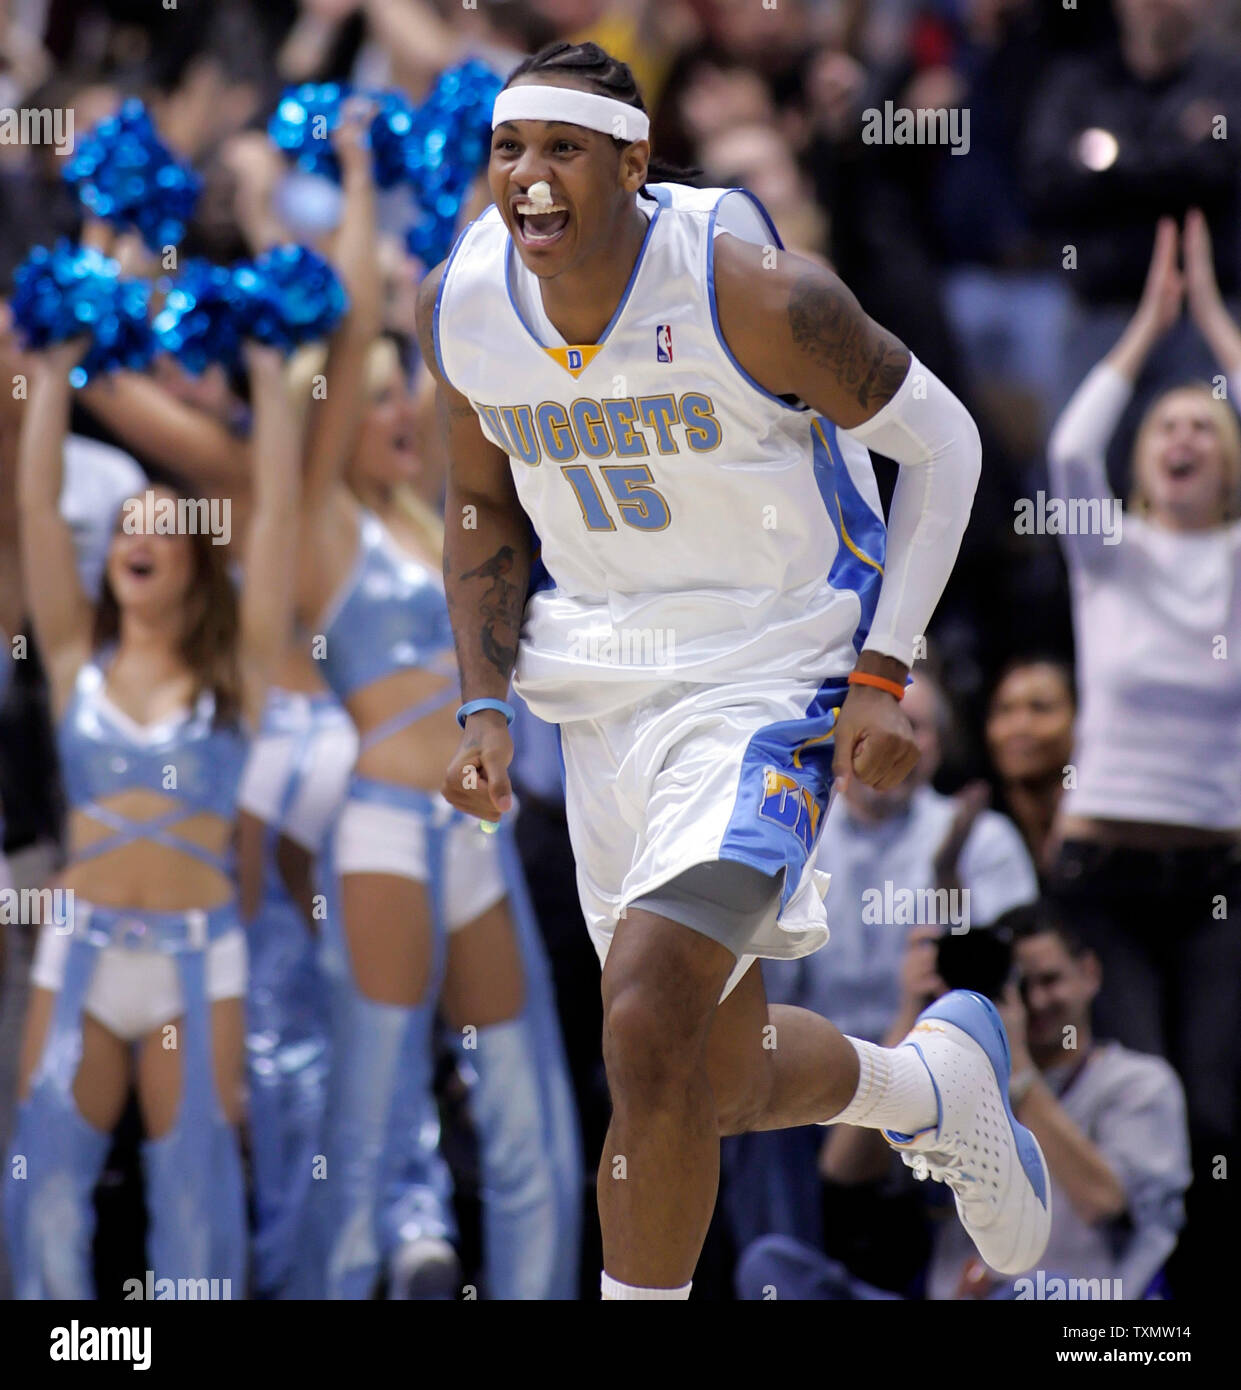 Dec. 8, 2007 - Carmelo Anthony Game-Used, Photo-Matched Denver Nuggets  White Jersey - 14 Points, 7 Rebounds - Resolution Photomatching on Goldin  Auctions